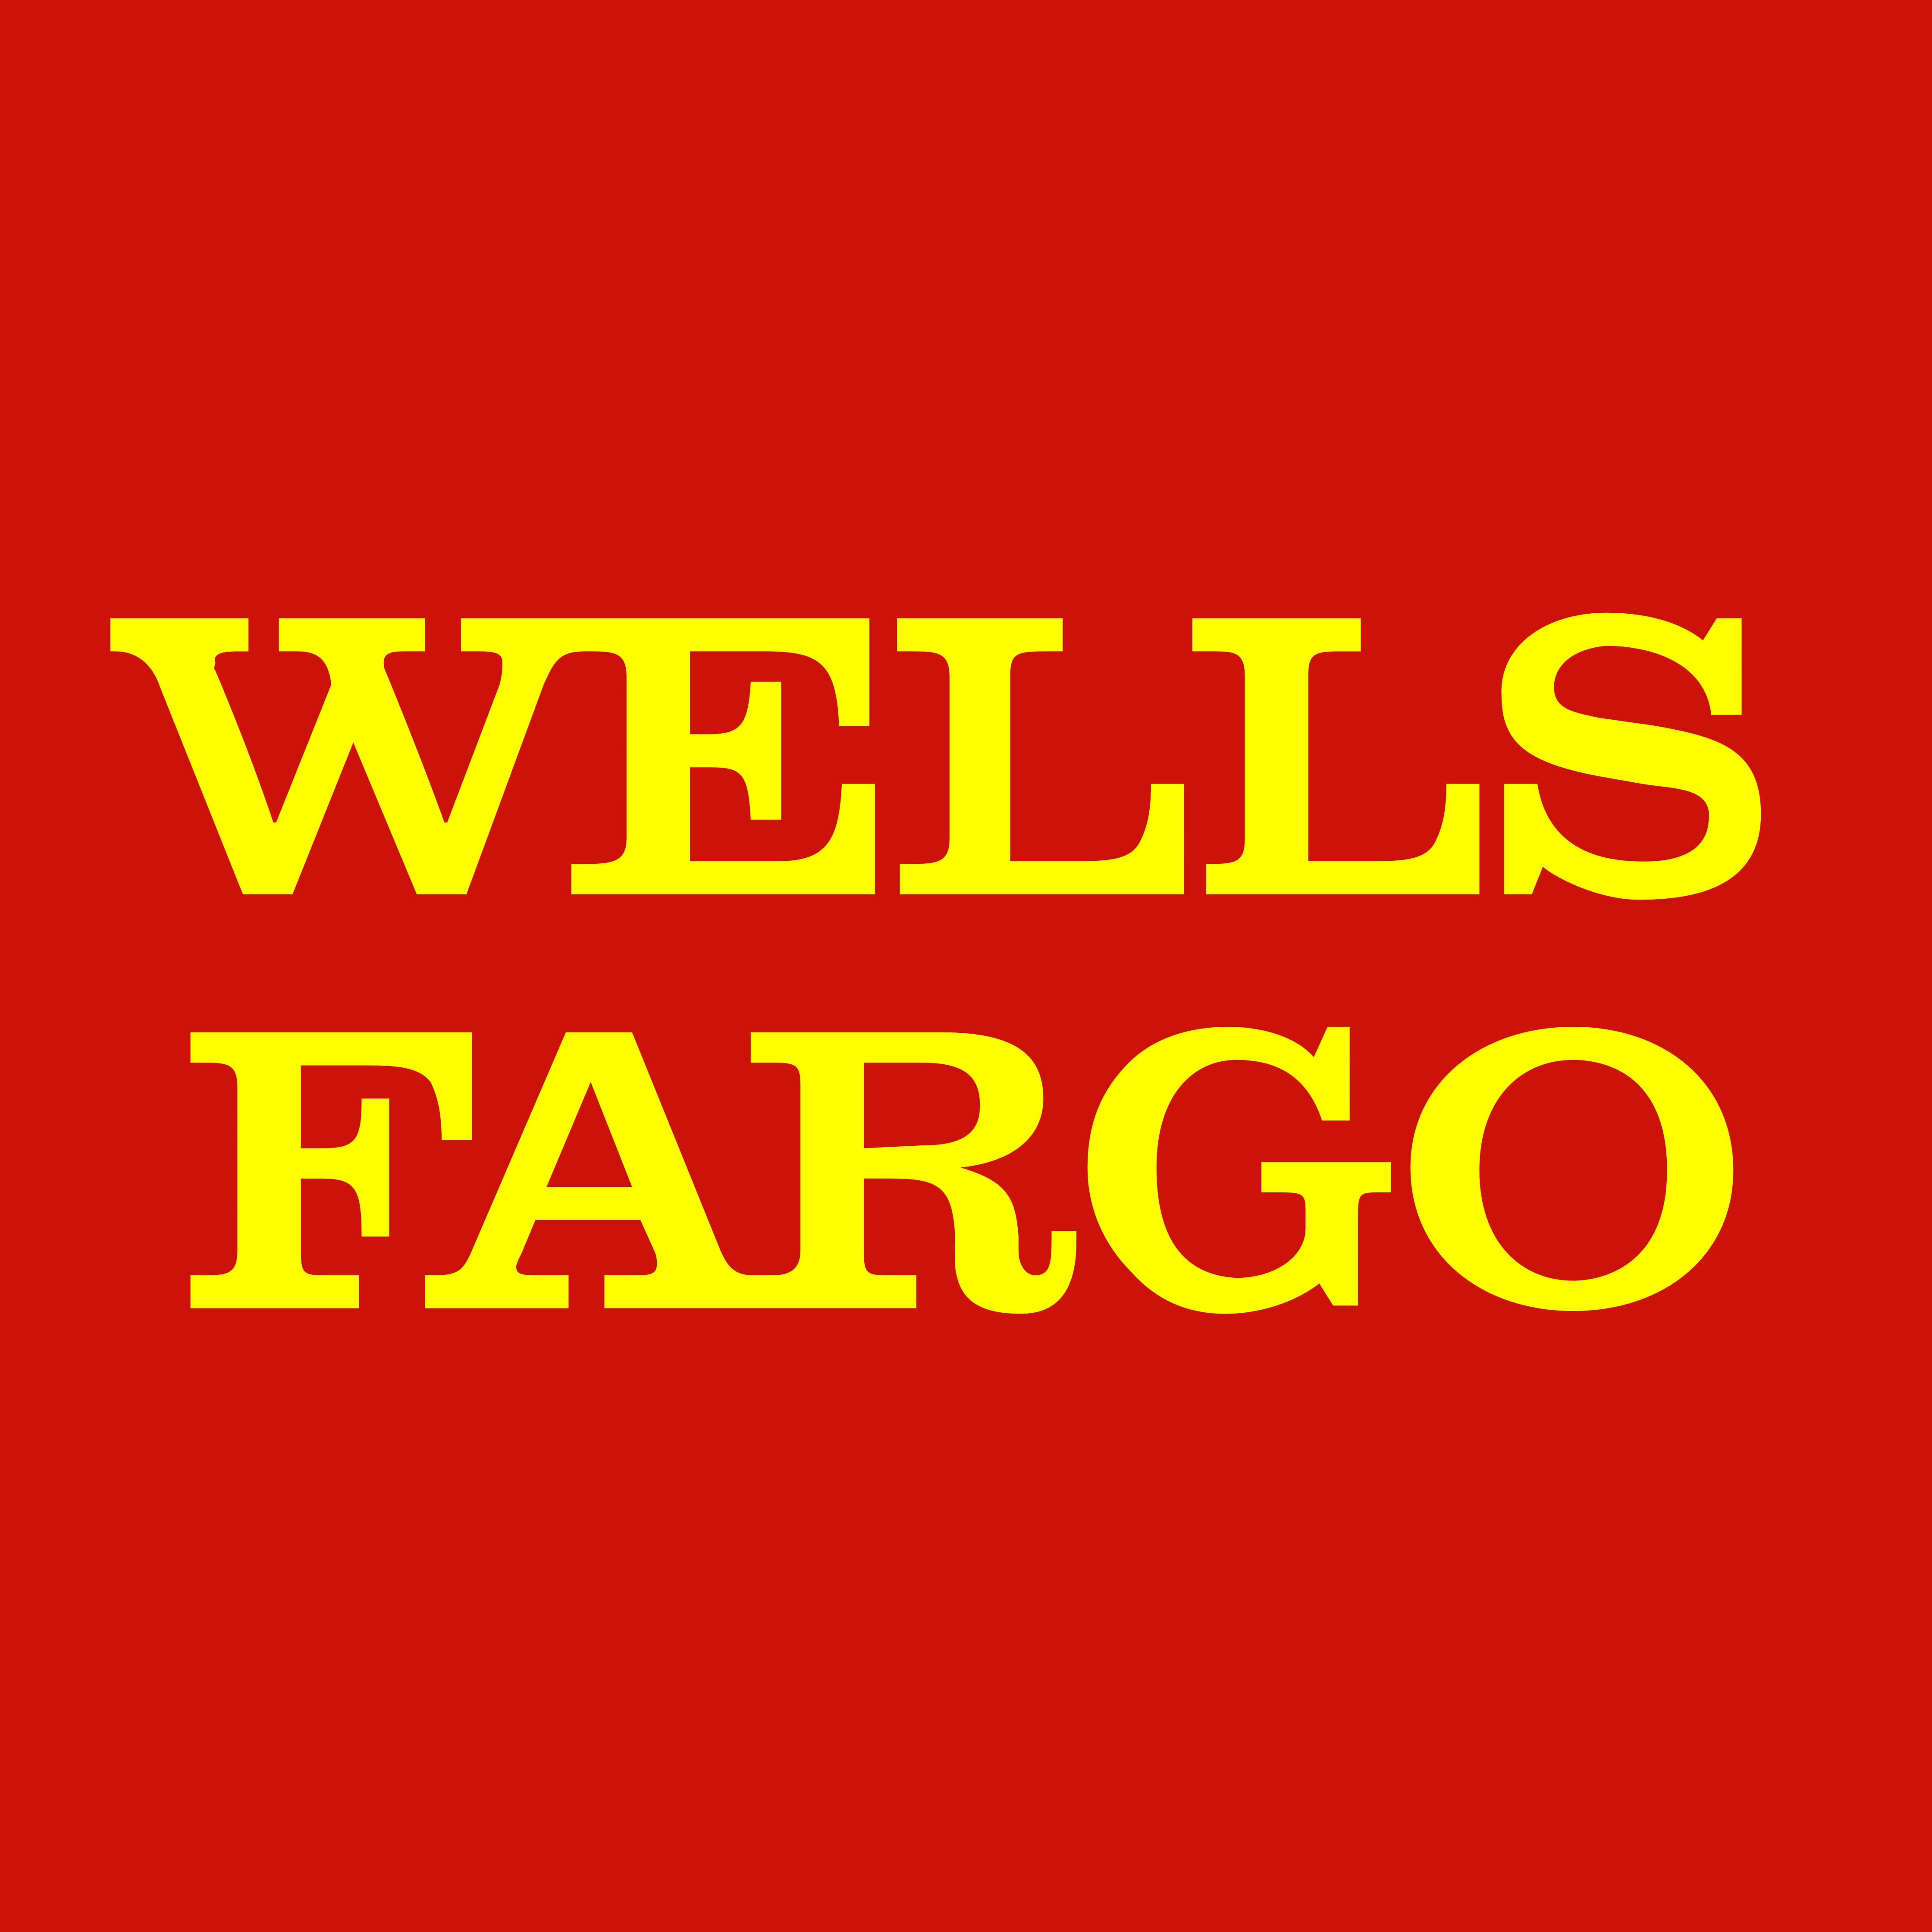 Albums 93+ Images what is the symbol of wells fargo & company Updated